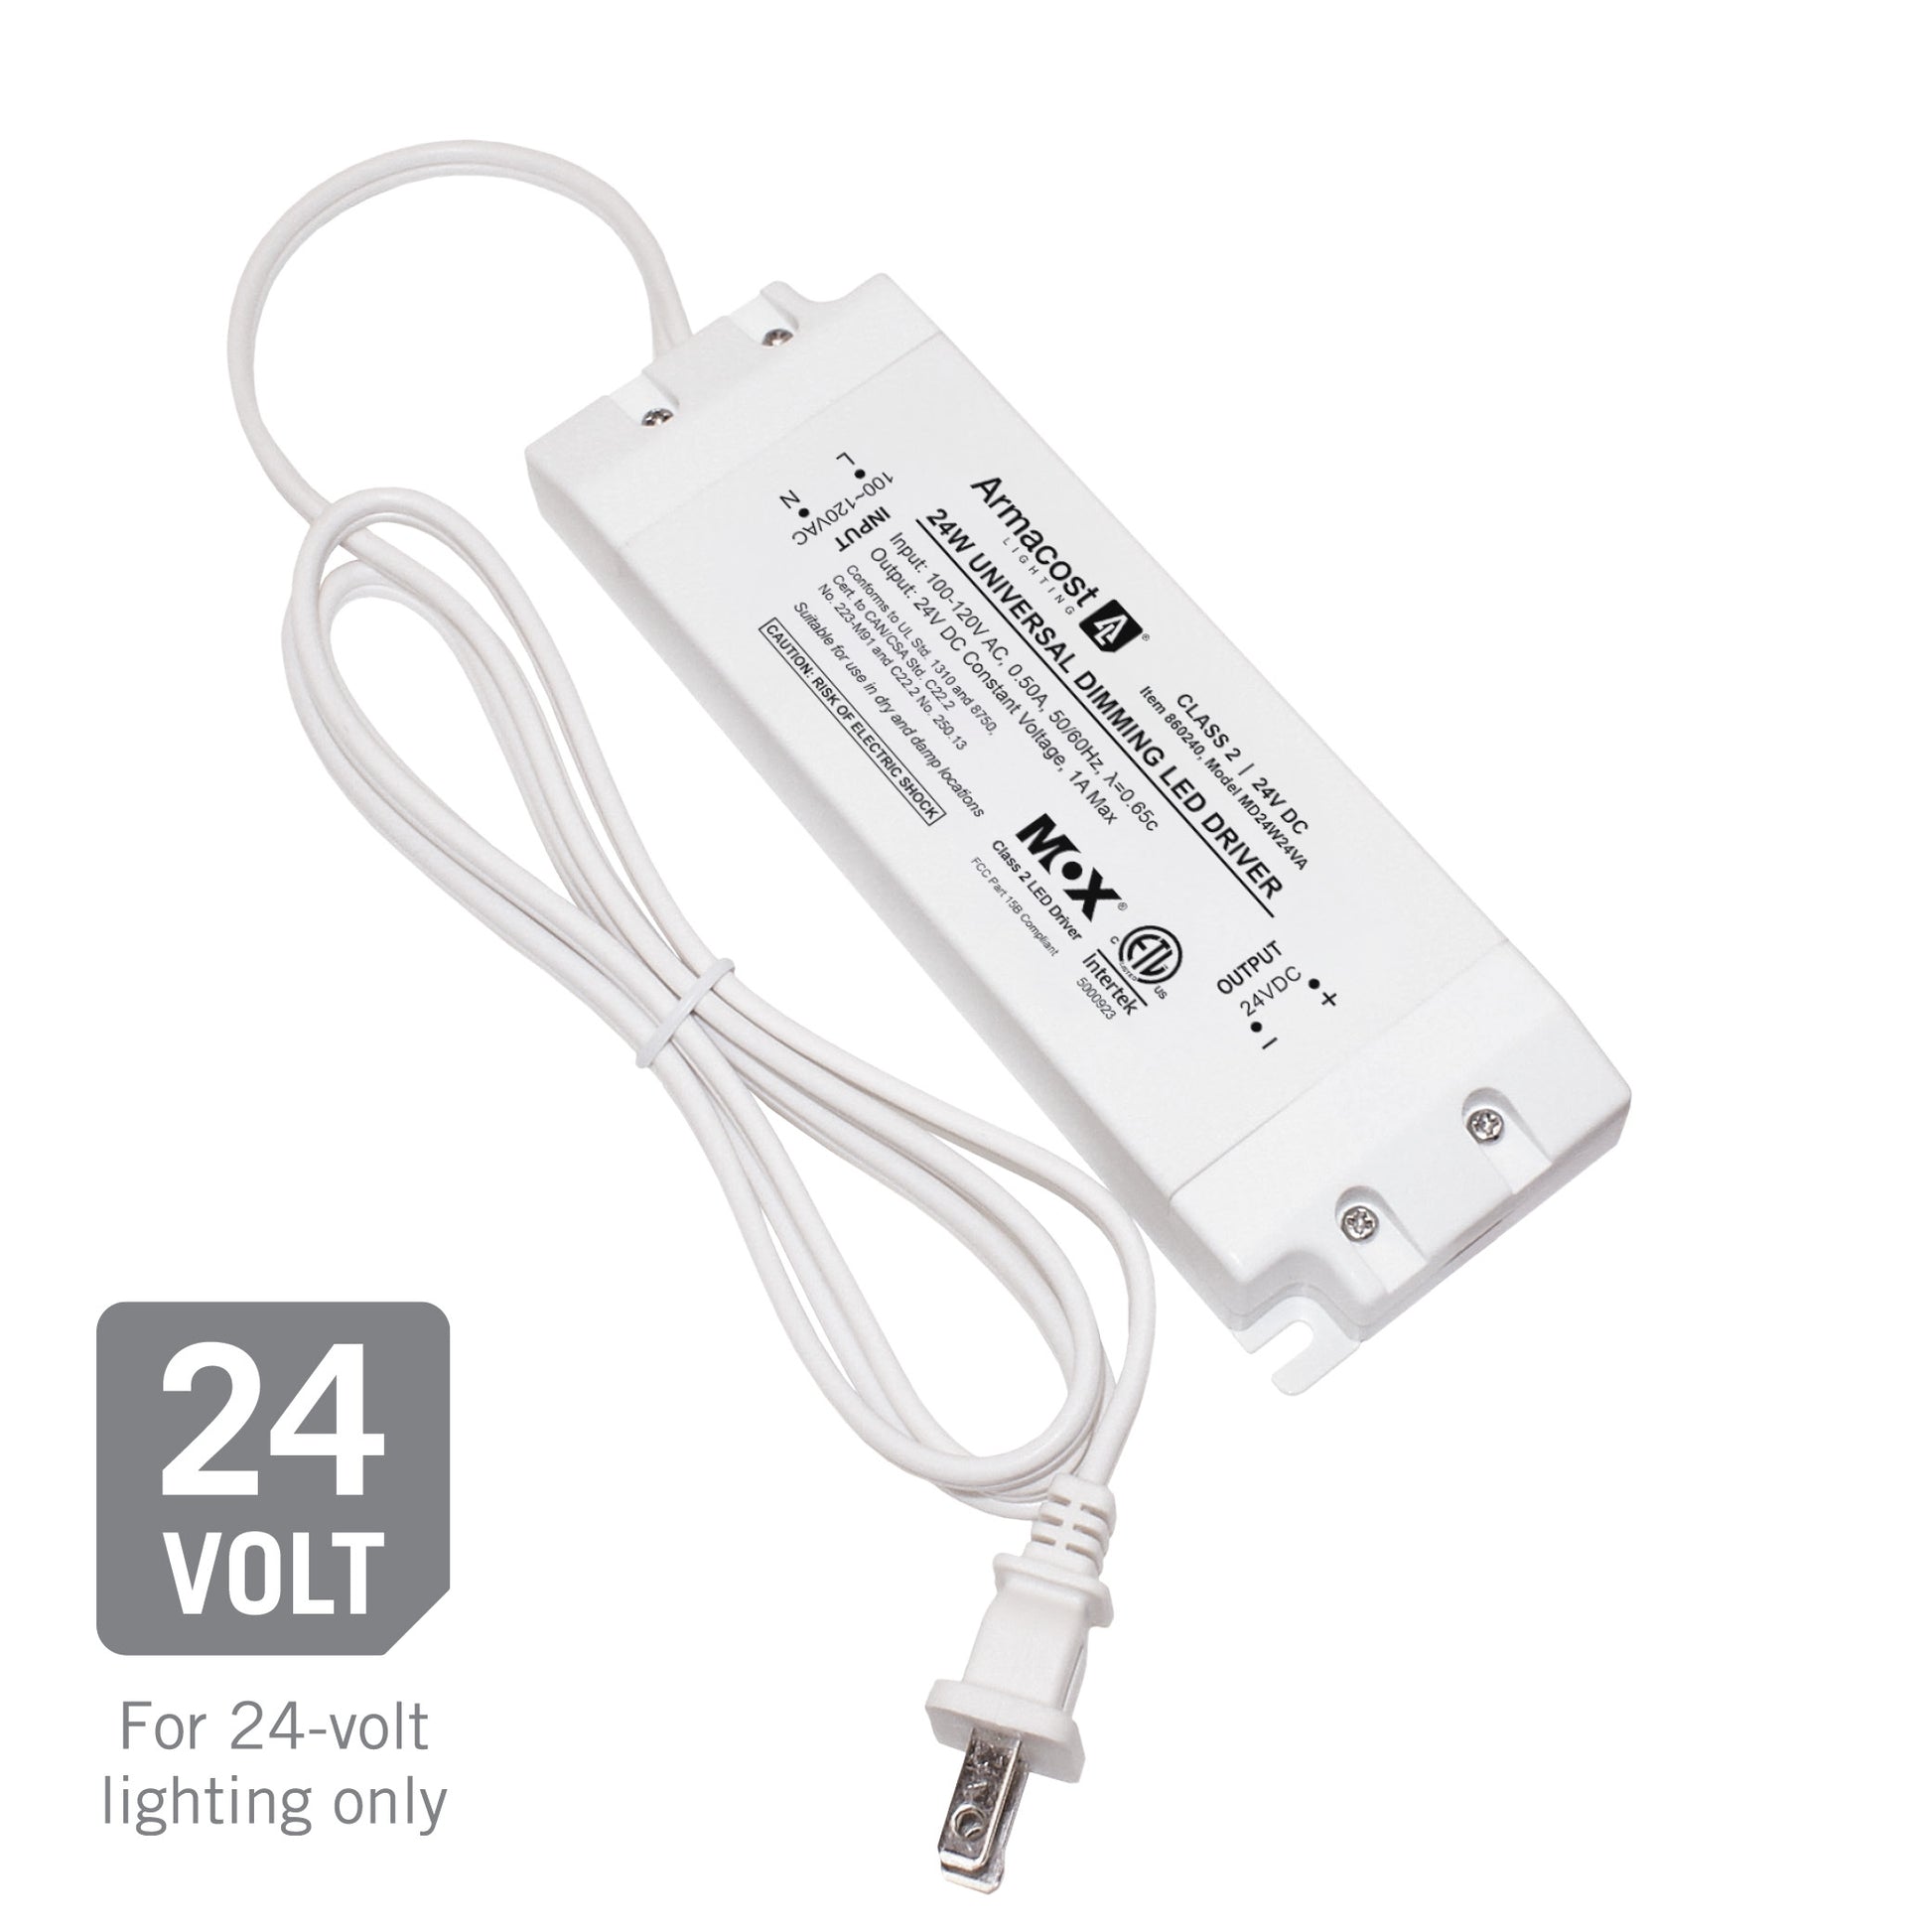 24V Power Supply for Dimmable LED Lights – Armacost Lighting